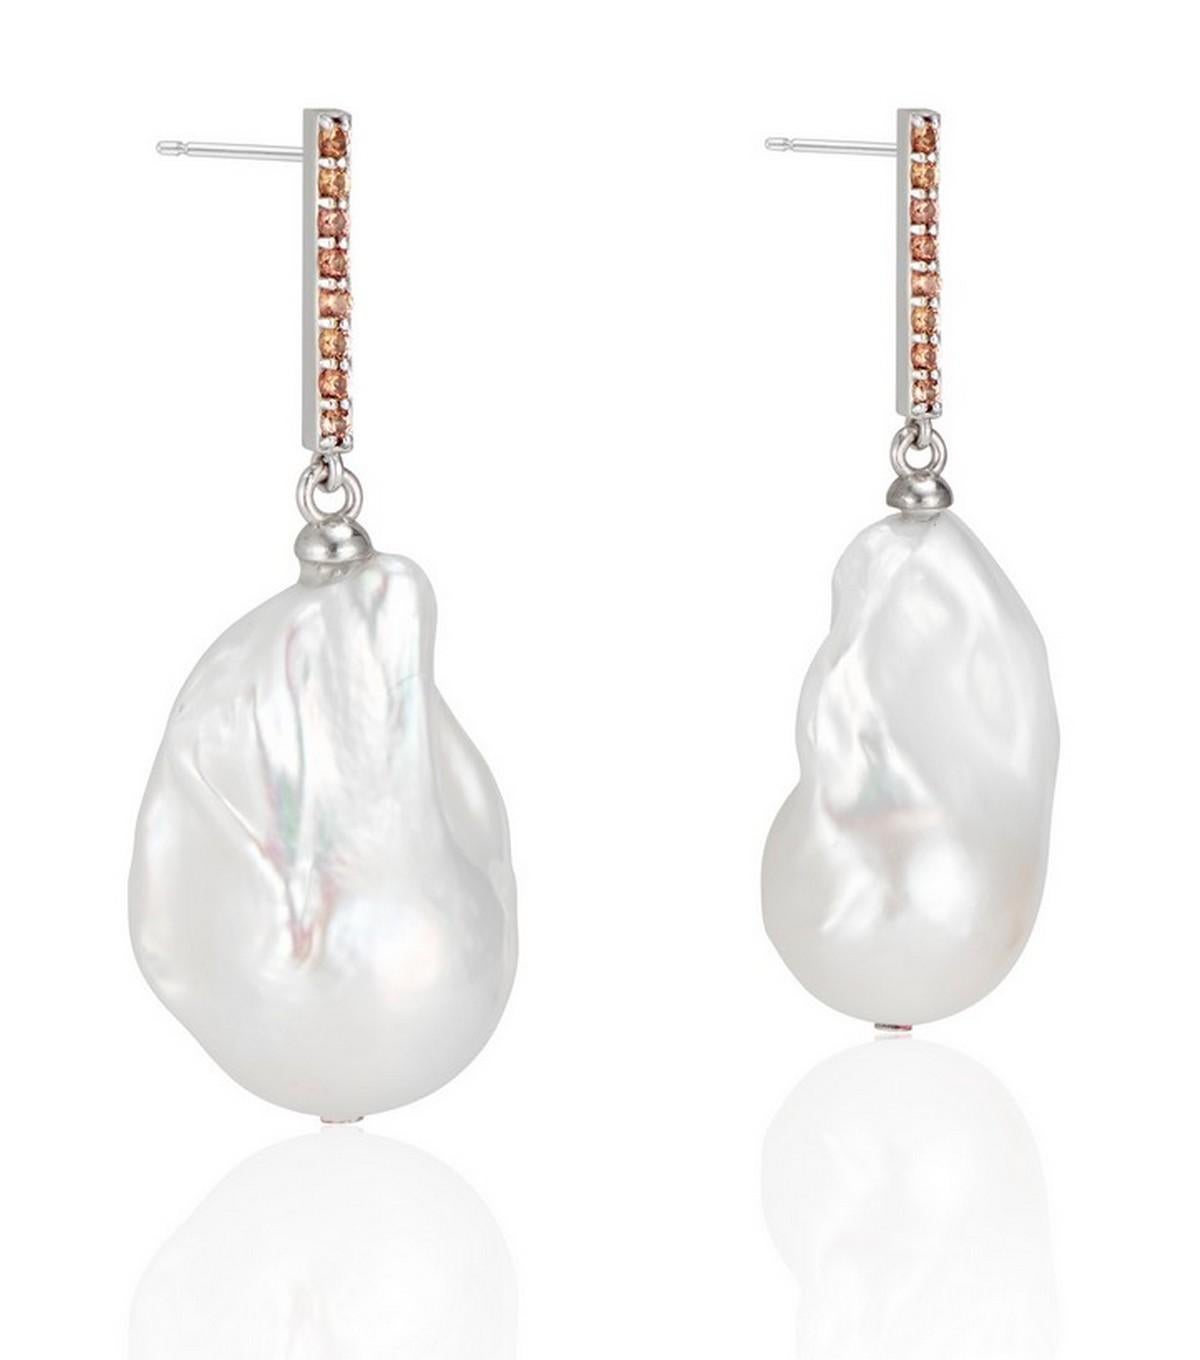 14K Vertical Gold Bar with a beautiful soft shade of orange sapphire and baroque pearl drop earring.
The hue of orange sapphire against the high polish white gold contrasts beautifully with the pearl, and the shimmering vertical bar gives the